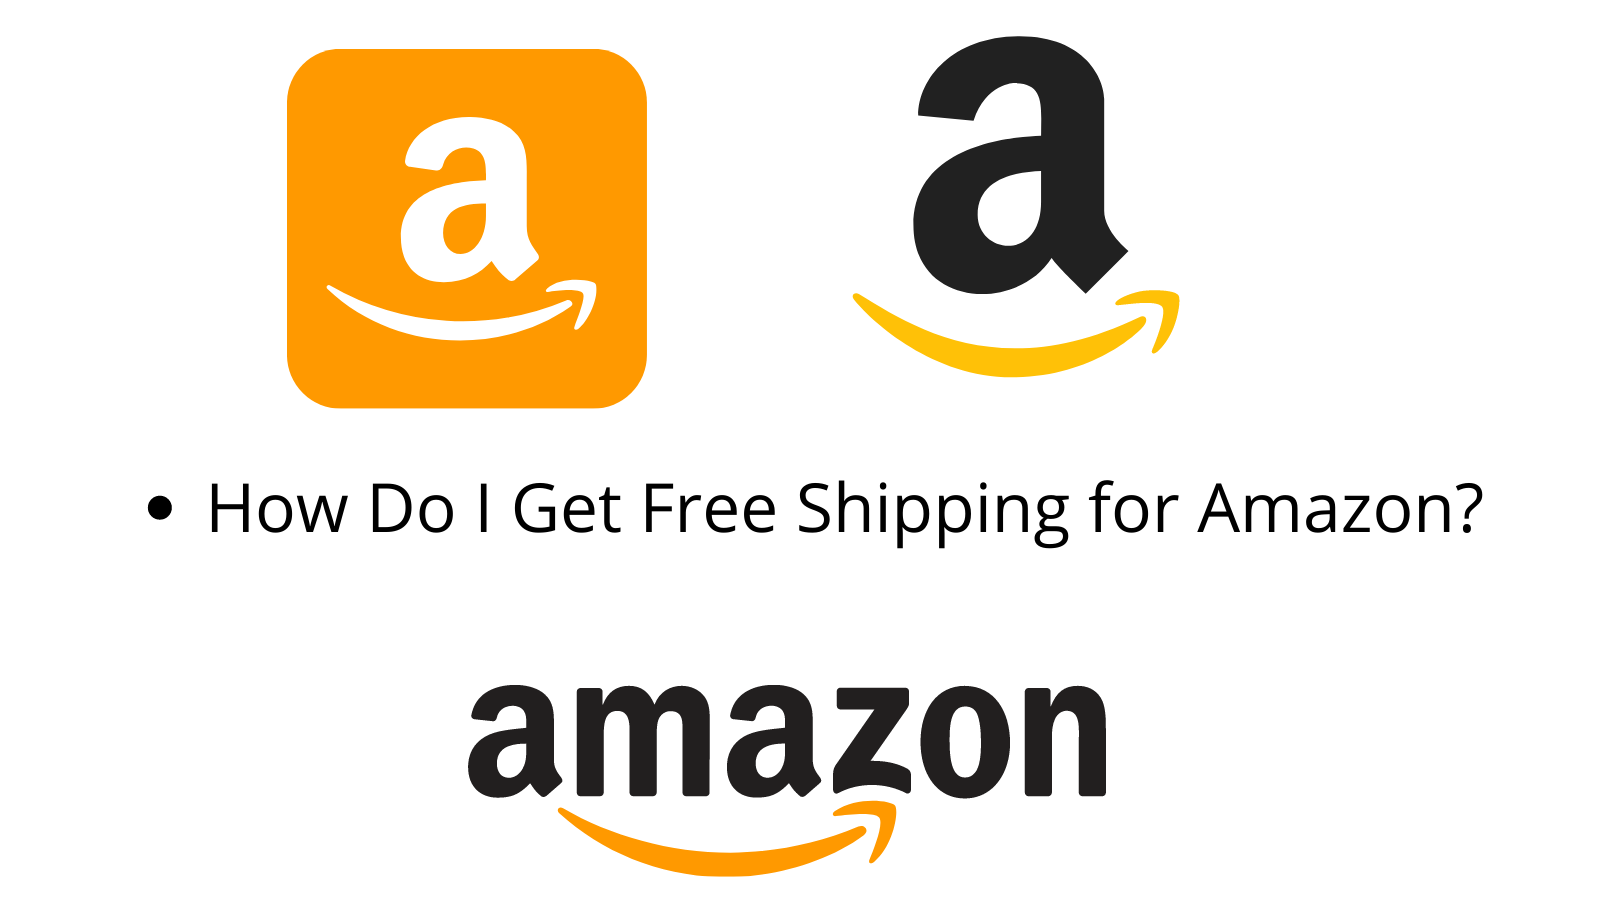 How Do I Get Free Shipping for Amazon?